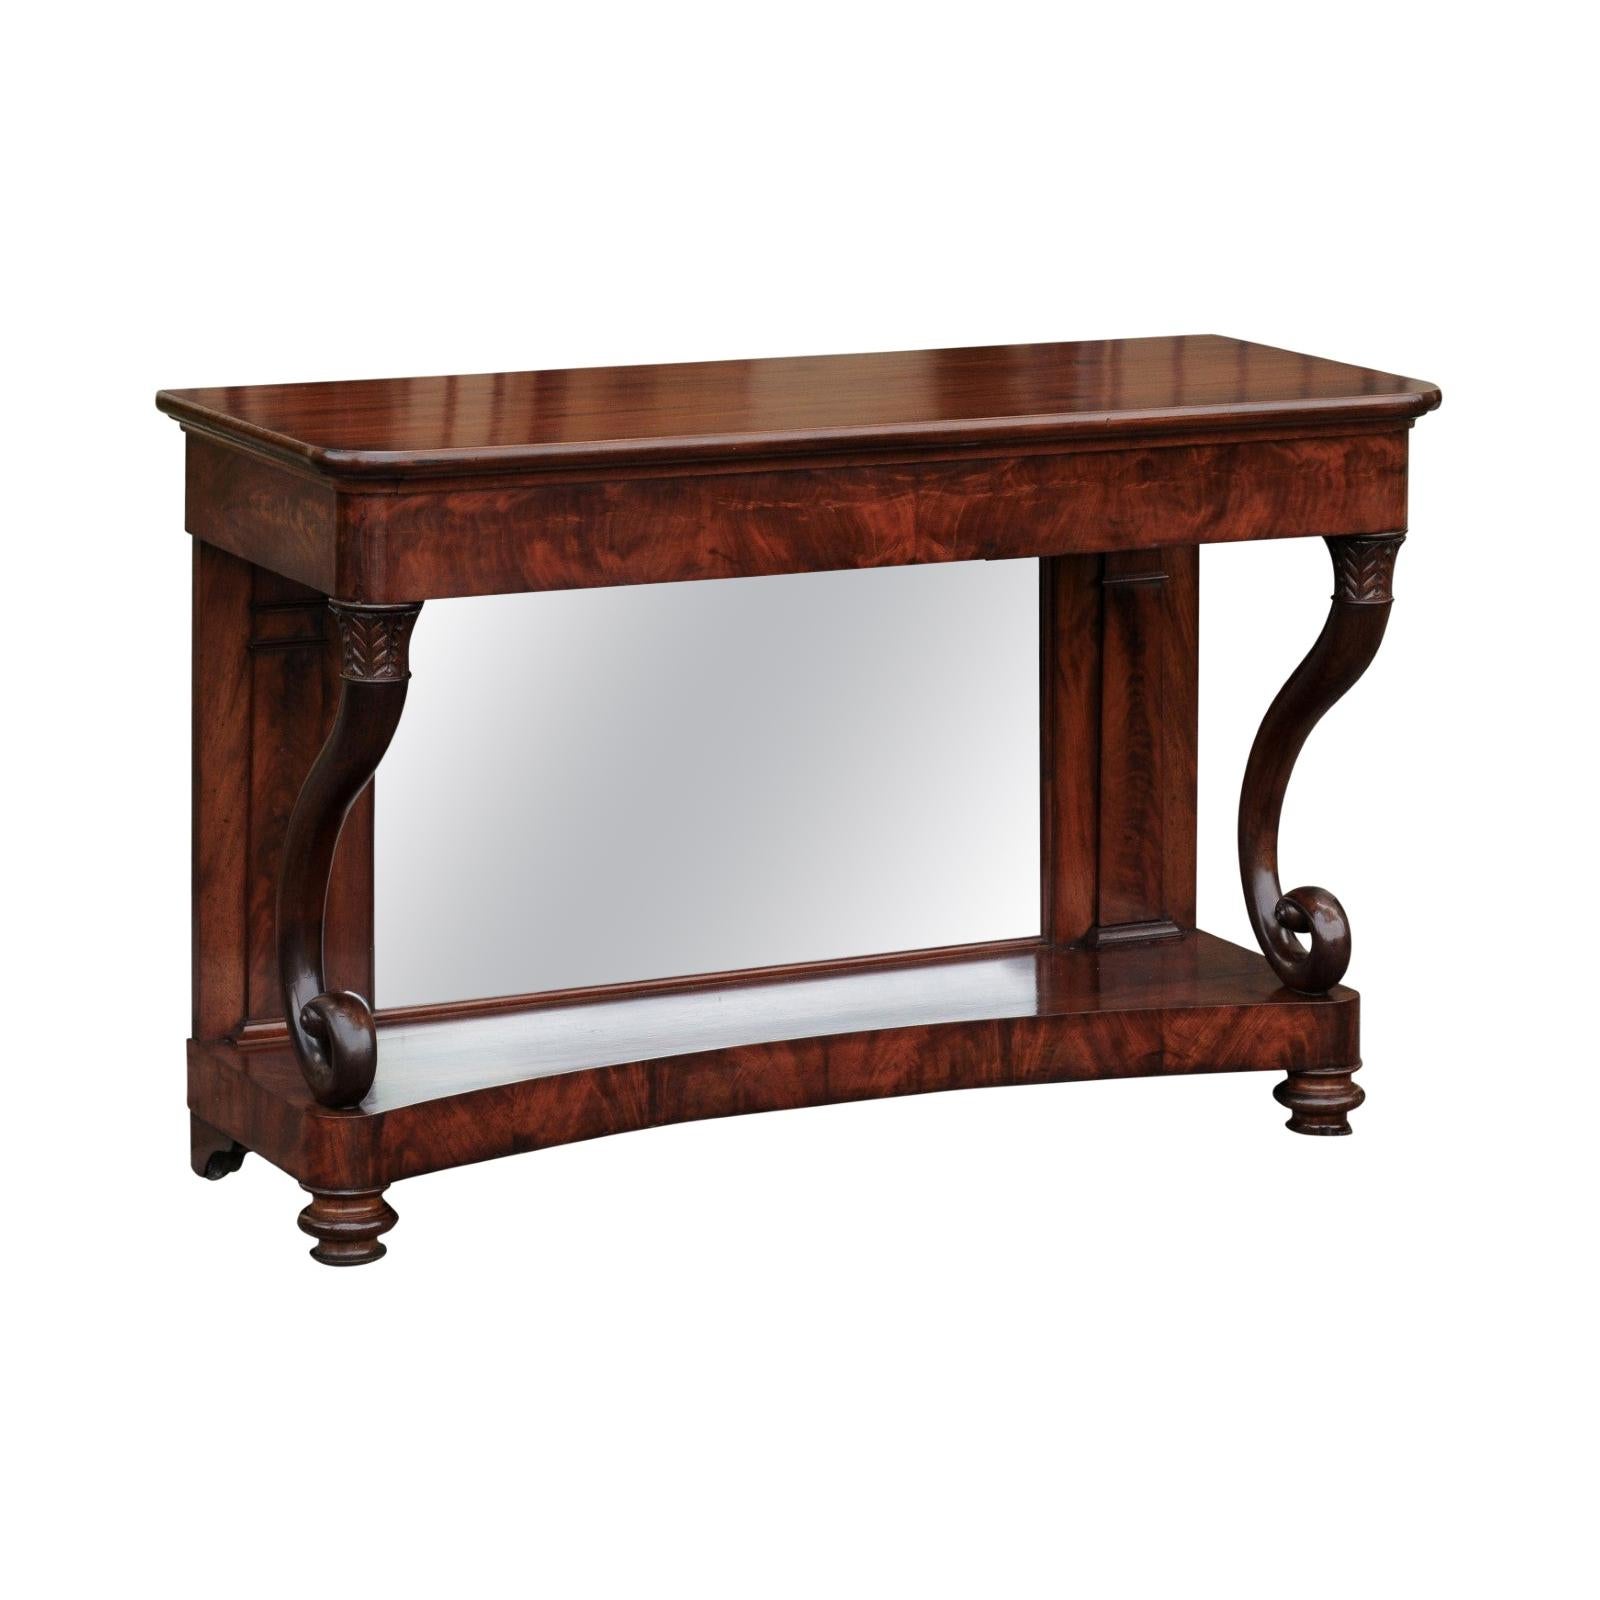 French Charles X Period 1830s Mahogany Console Table with Cornucopia Legs